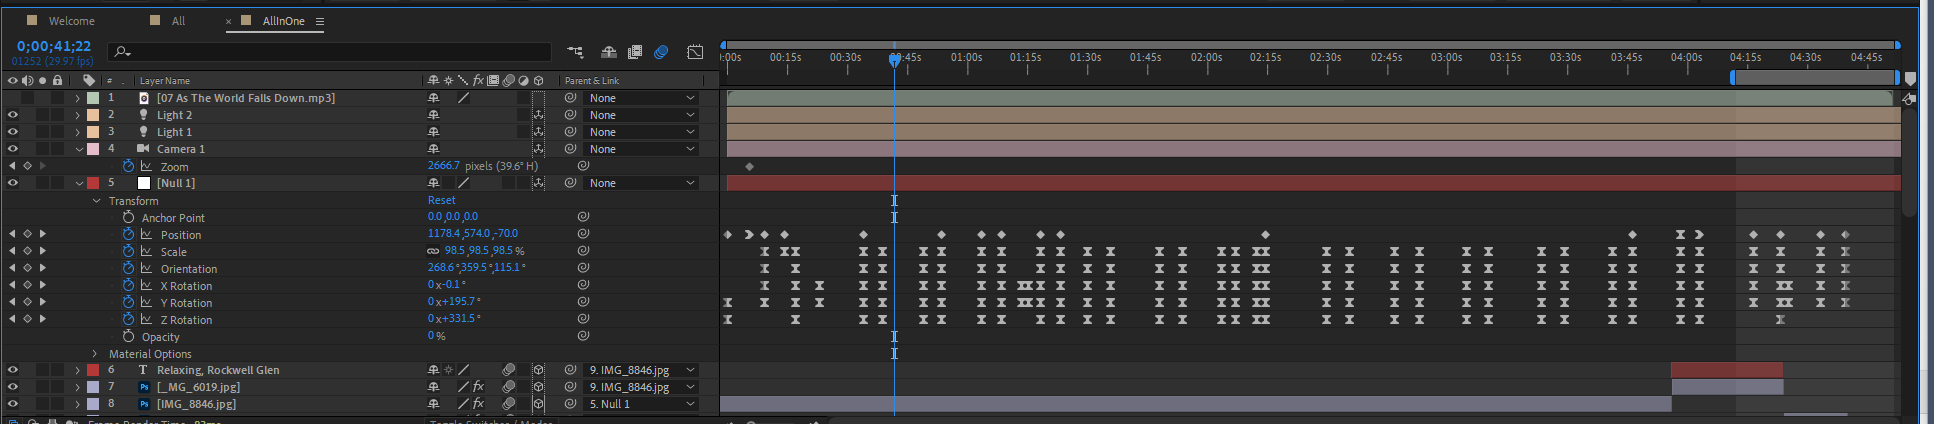 After Effects timeline for Memory Sphere 2022